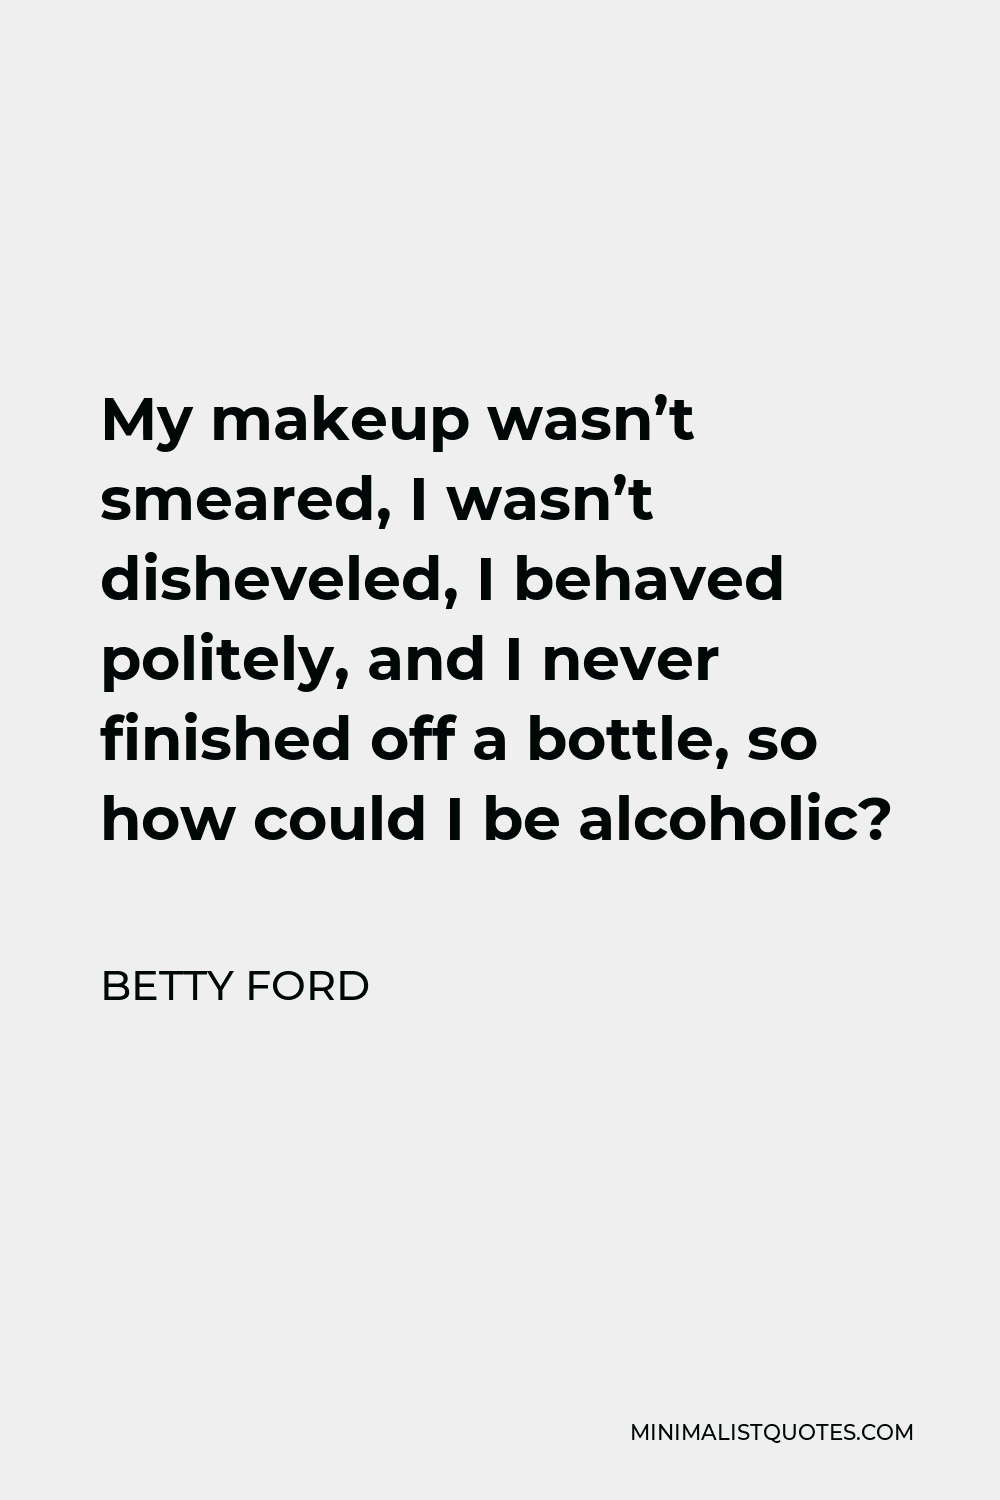 Betty Ford Quote - My makeup wasn’t smeared, I wasn’t disheveled, I behaved politely, and I never finished off a bottle, so how could I be alcoholic?